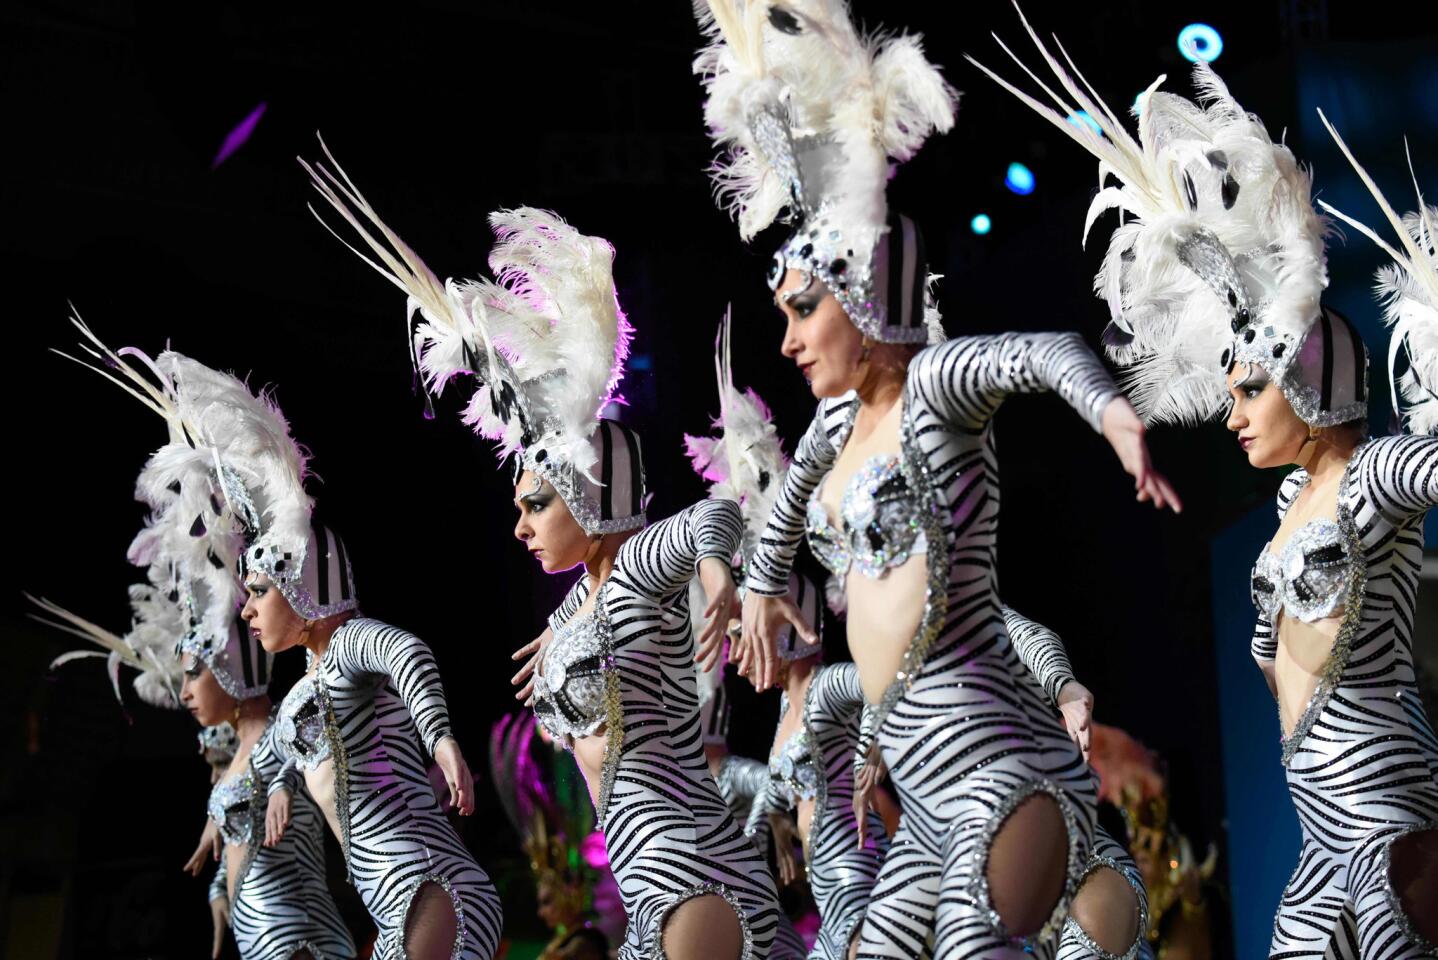 Carnival around the world - Canary Islands